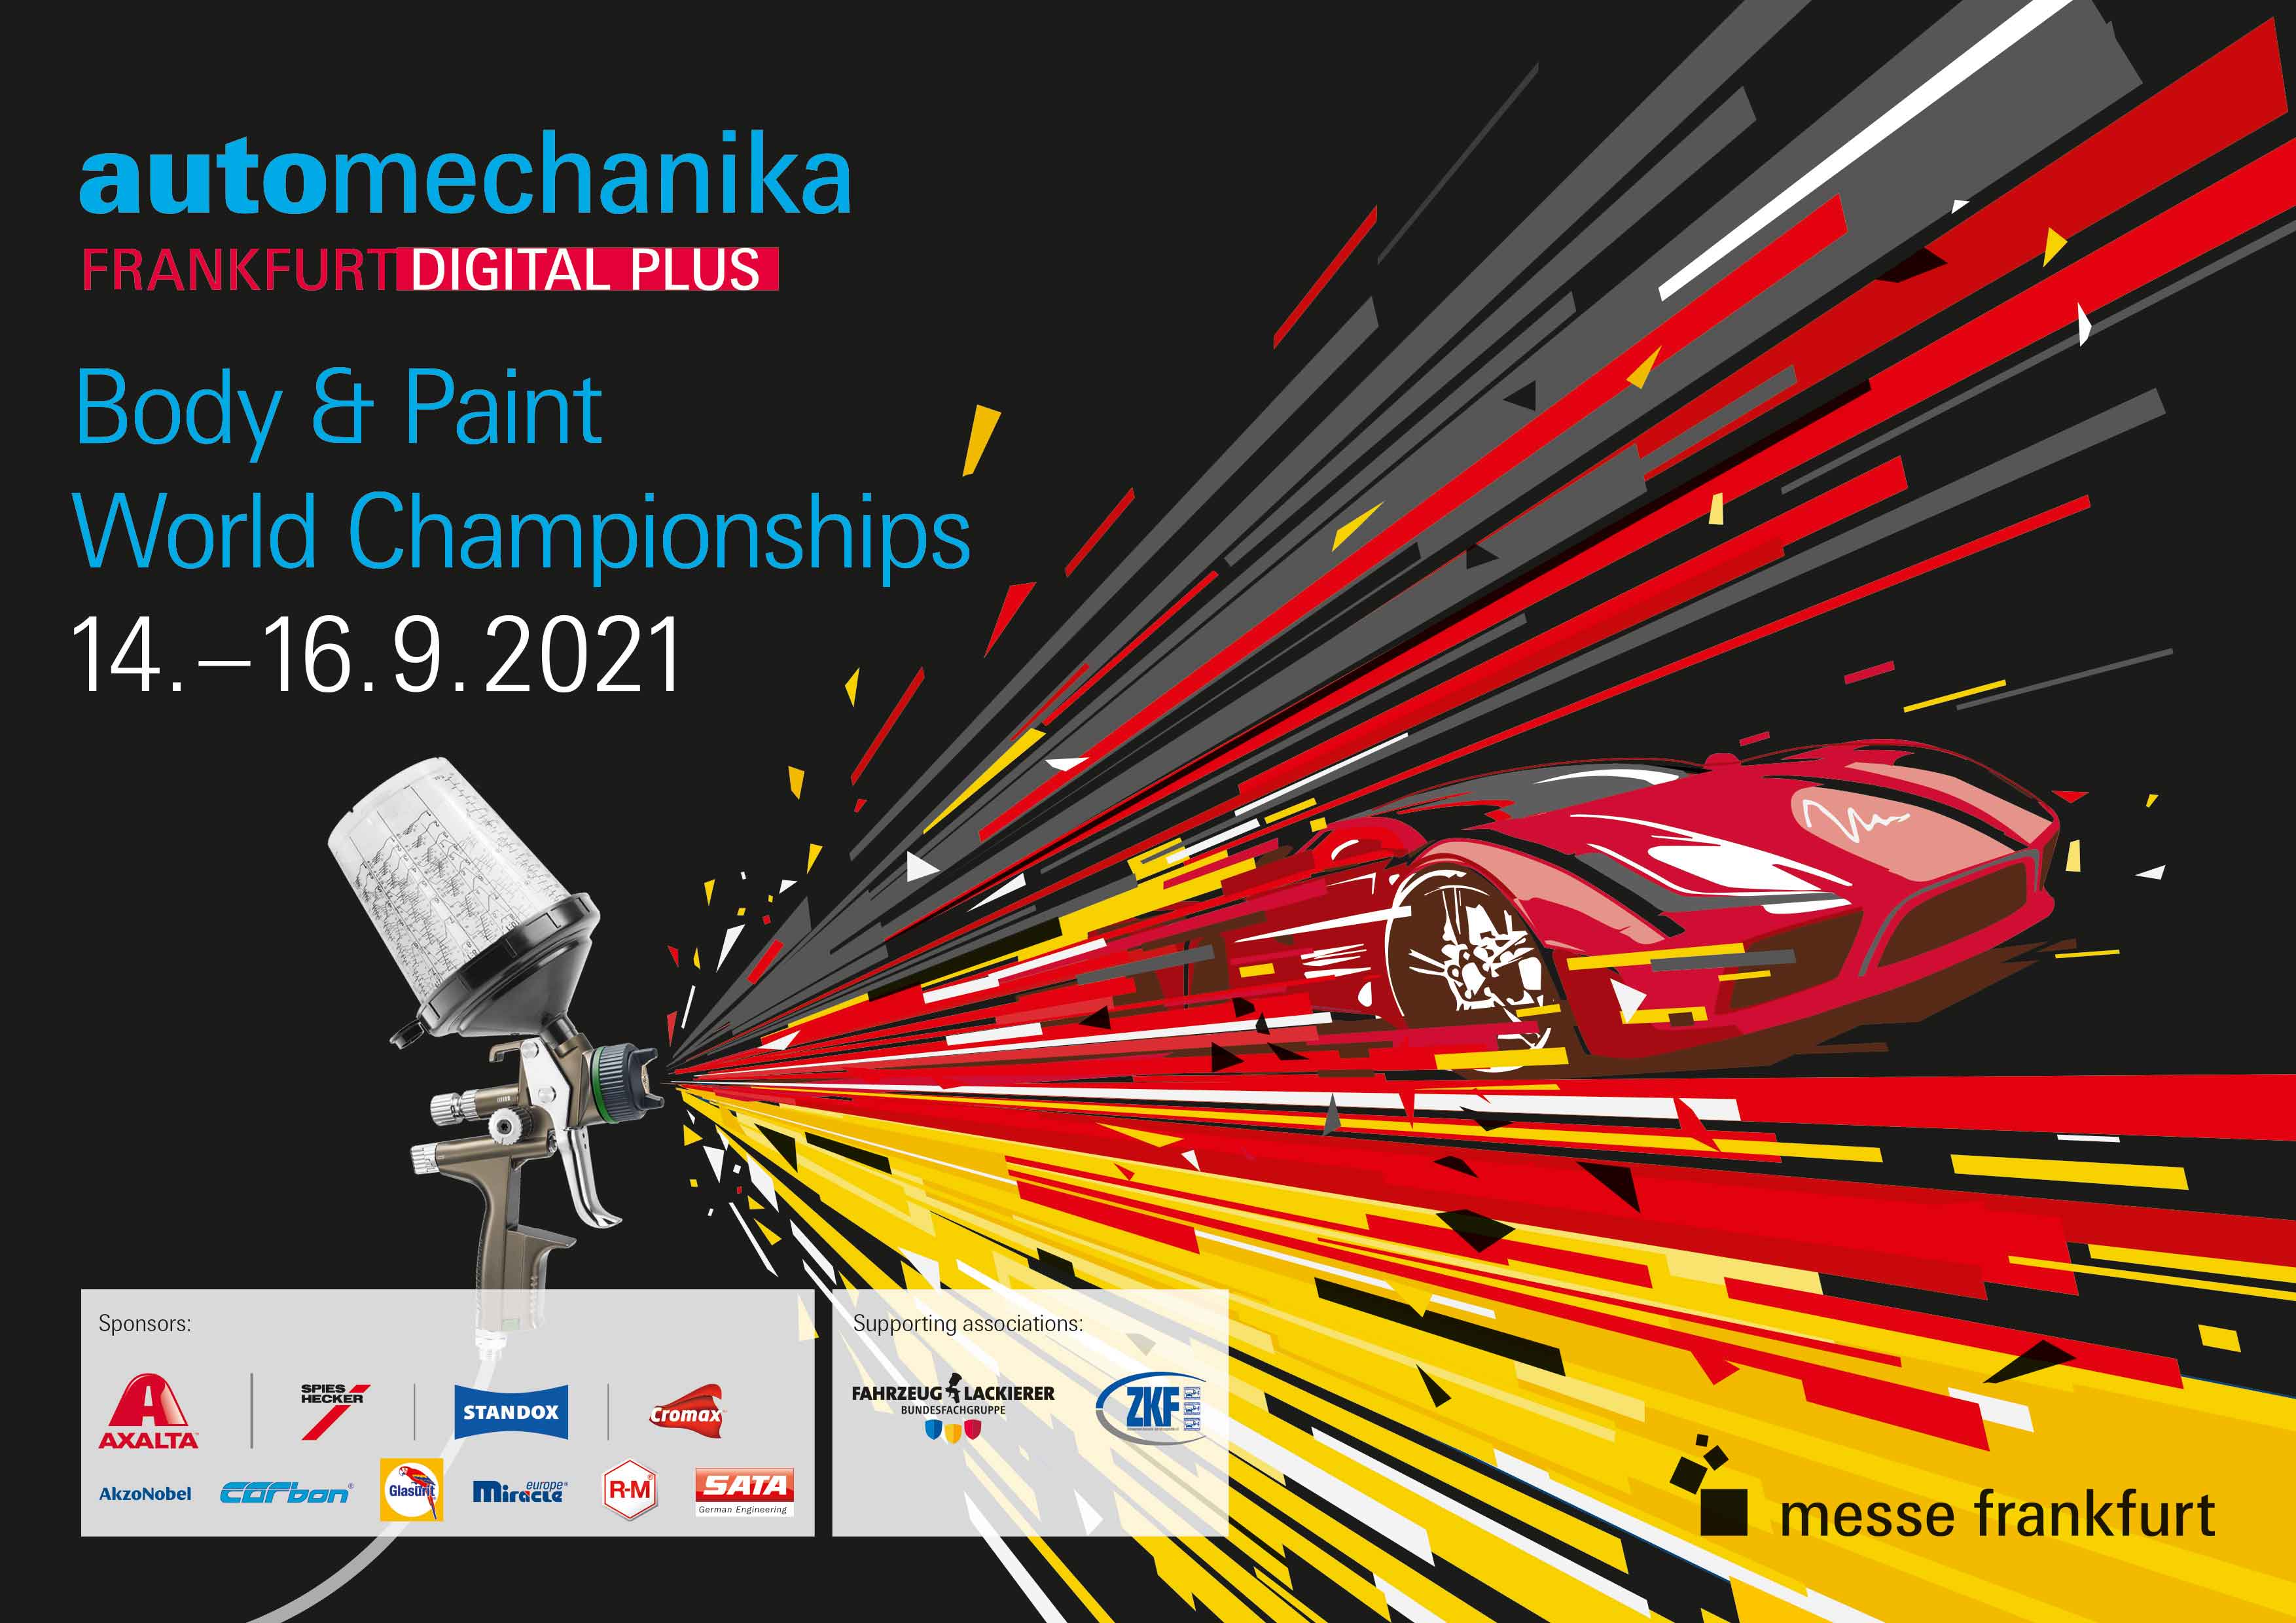 German participants are on the home stretch of the Automechanika Body & Paint competition